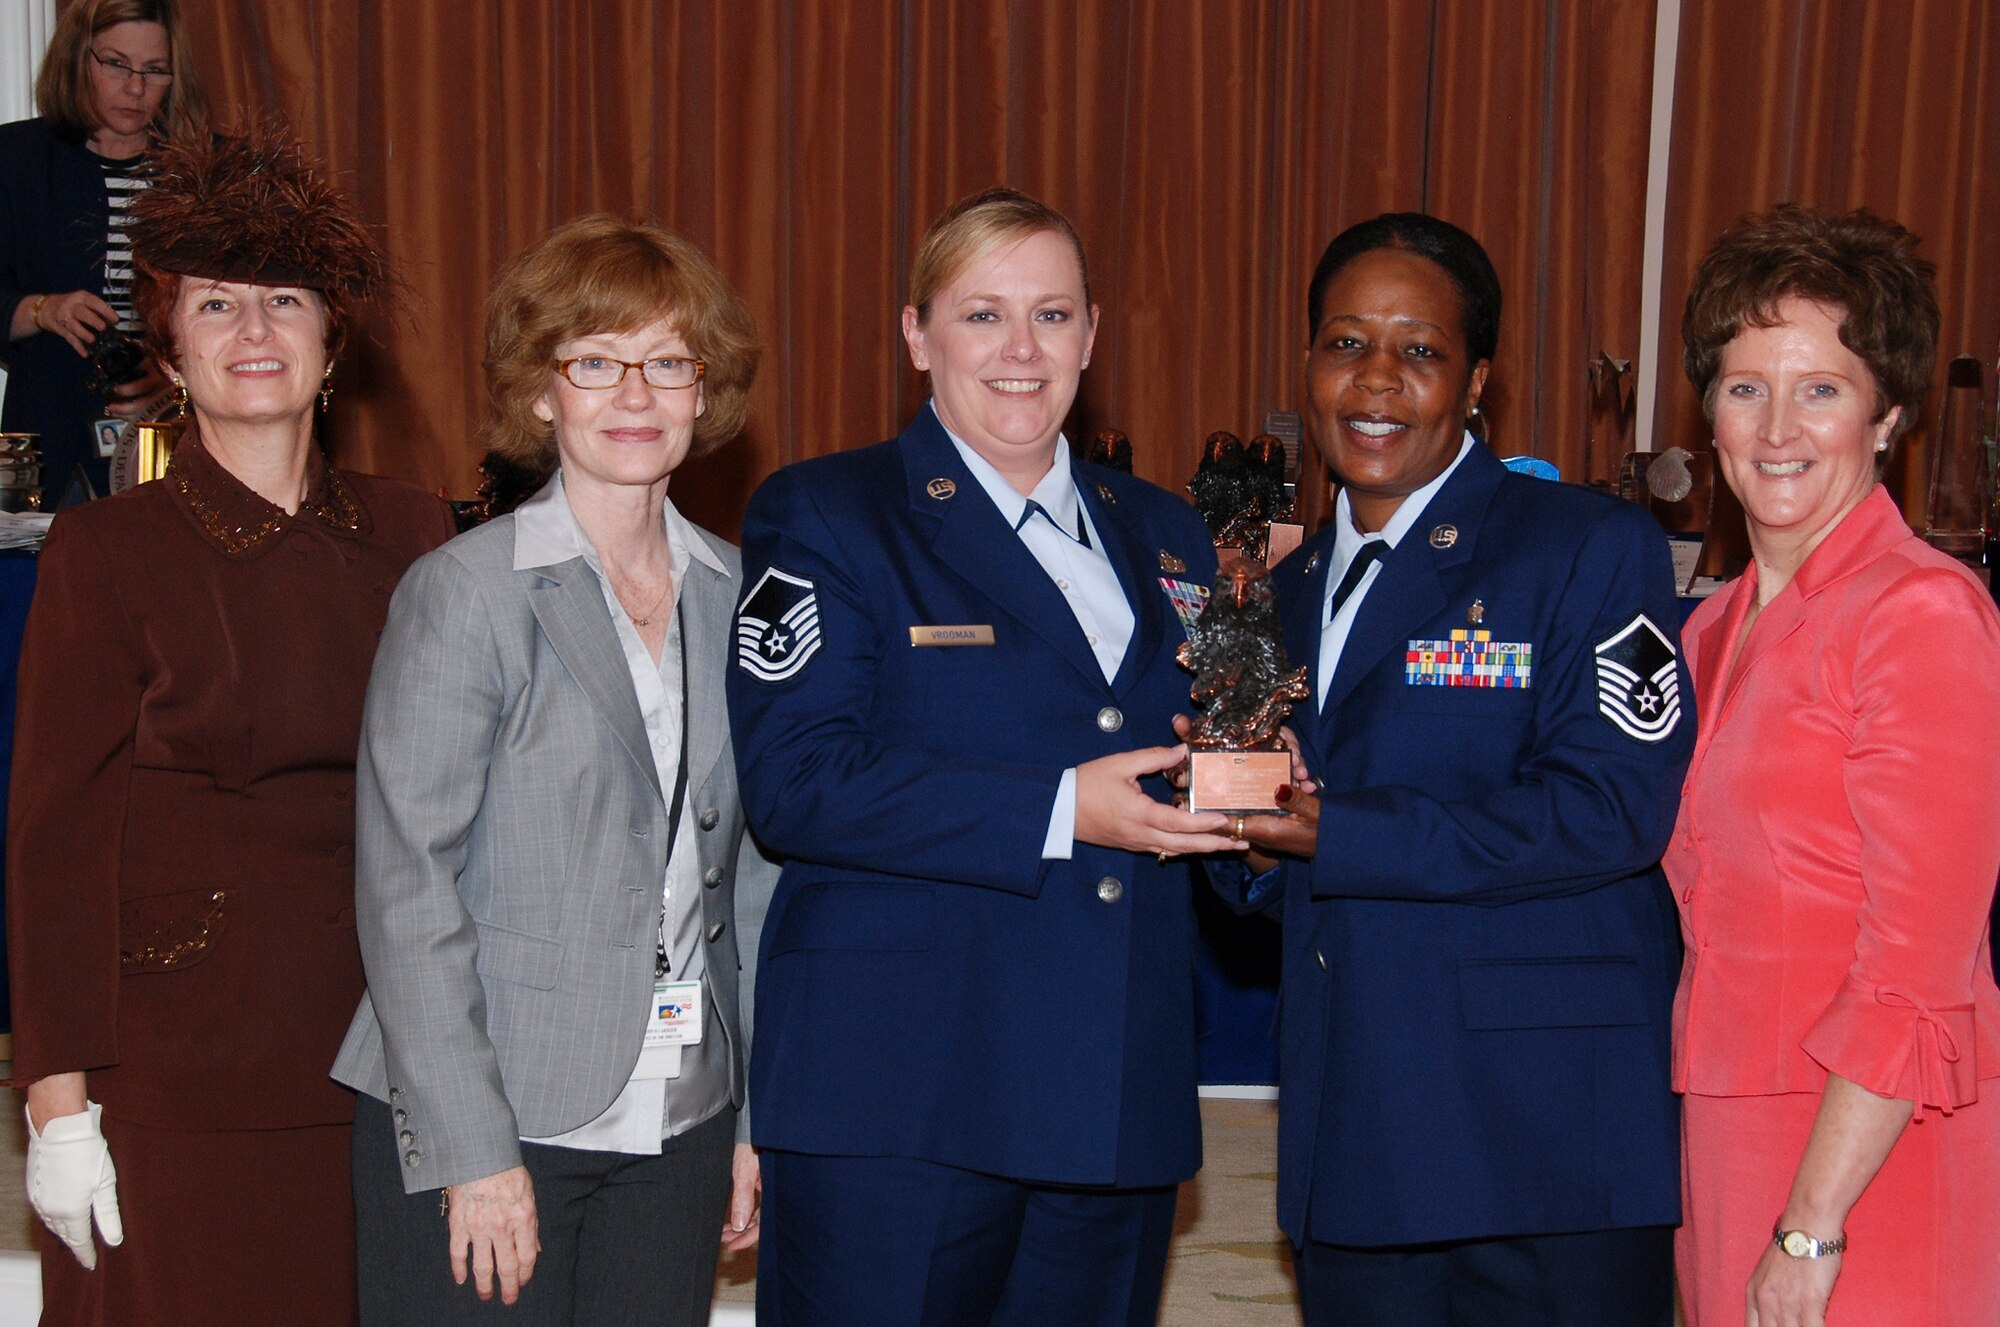 Recently, Los Angeles Air Force Base was the recipient of an award from the Los Angeles VA Hospital honoring base personnel for their volunteer efforts at the hospital. Master Sgt. Lori Vrooman and Master Sgt. December Garner accepted the award on behalf of the base at the hospital’s annual luncheon, April 17. (Photo by Paula Berger, Los Angeles VA Hospital)